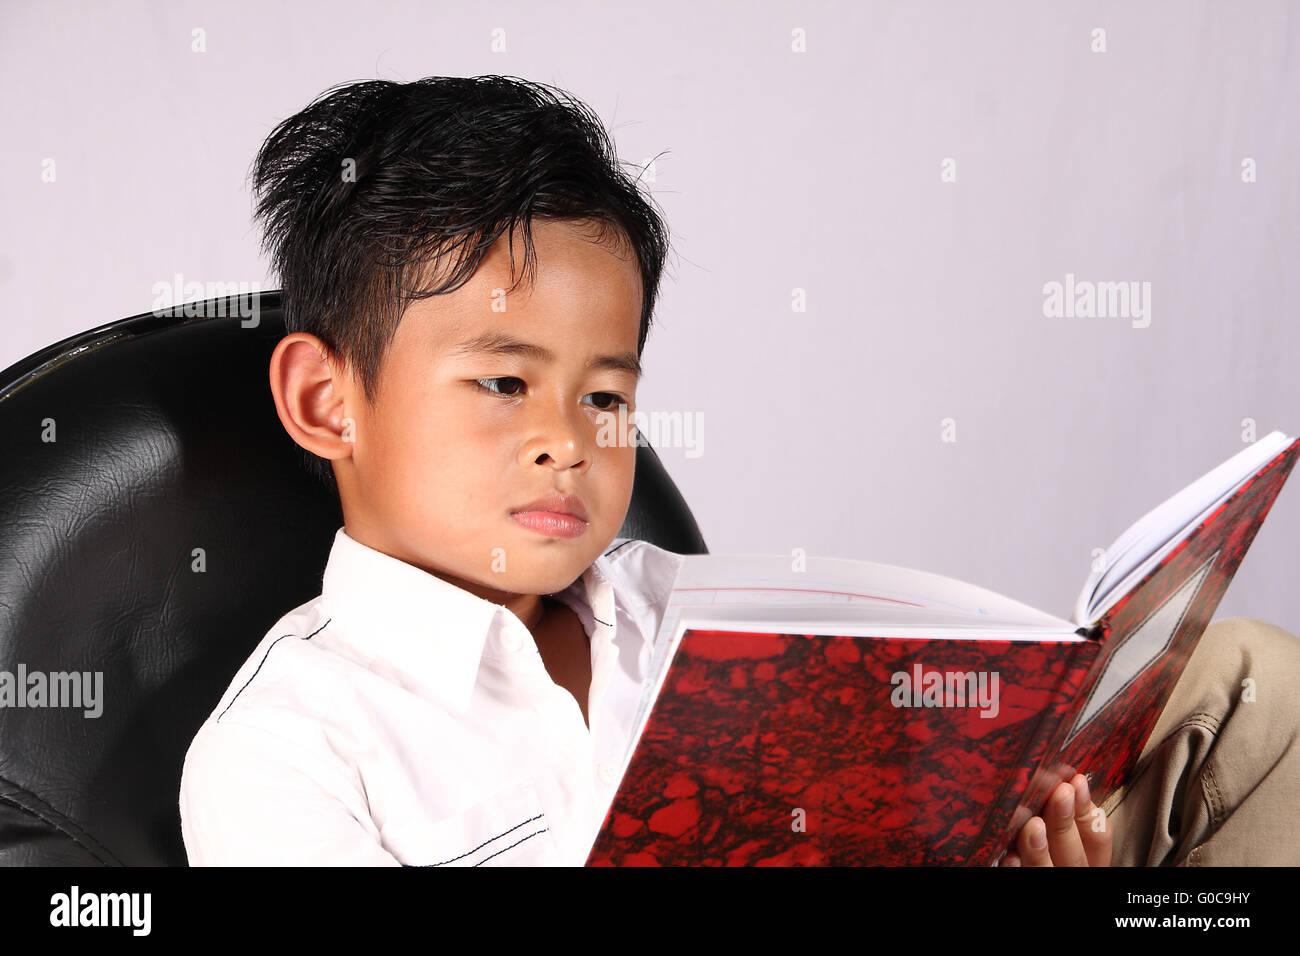 Smart Asian boy reading book while sitting on chair Stock Photo